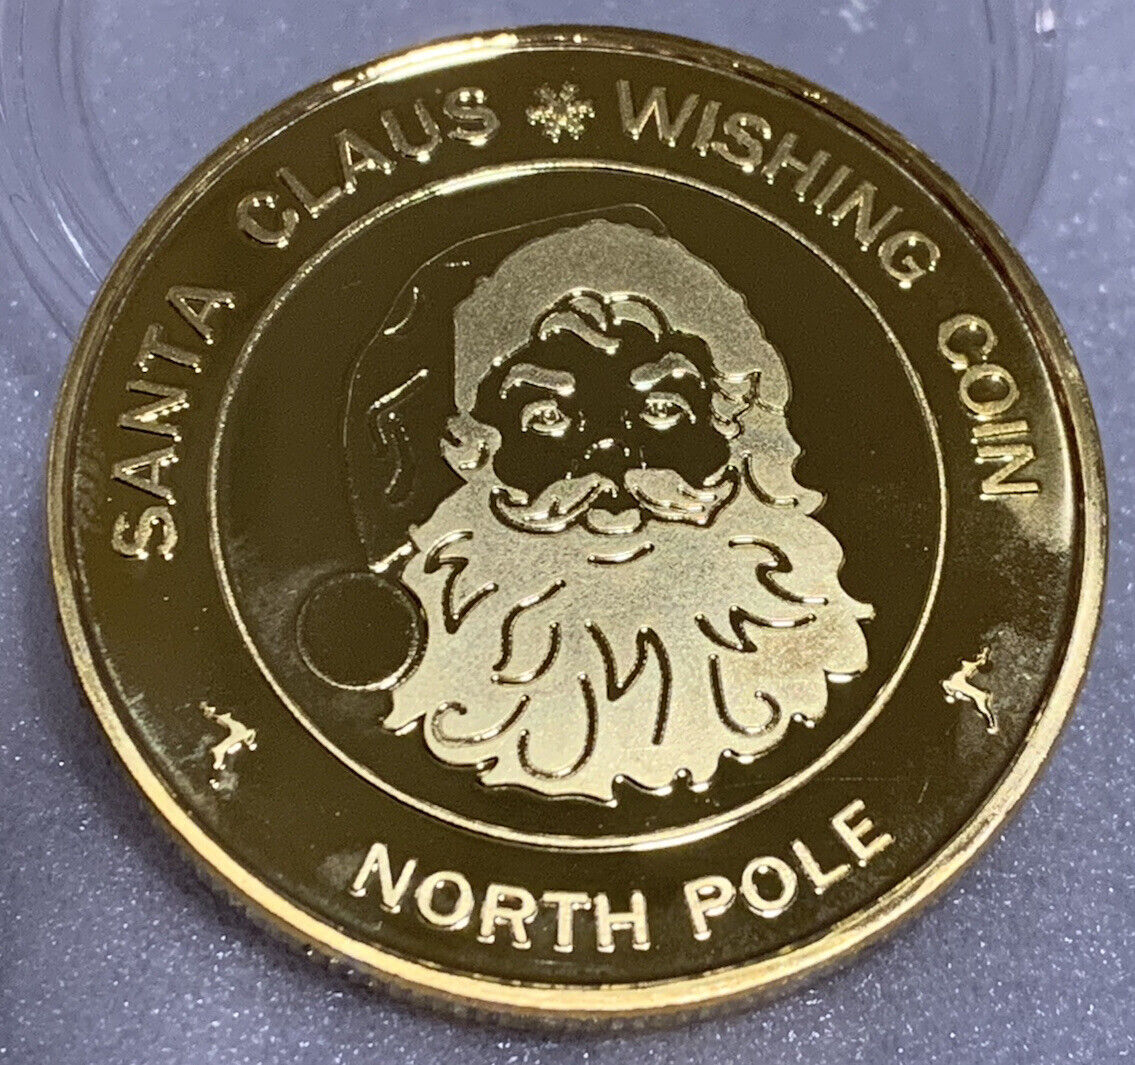 * Santa Claus Wishing New Coin Gold Plated “Believe In The Magic Of Christmas”NP